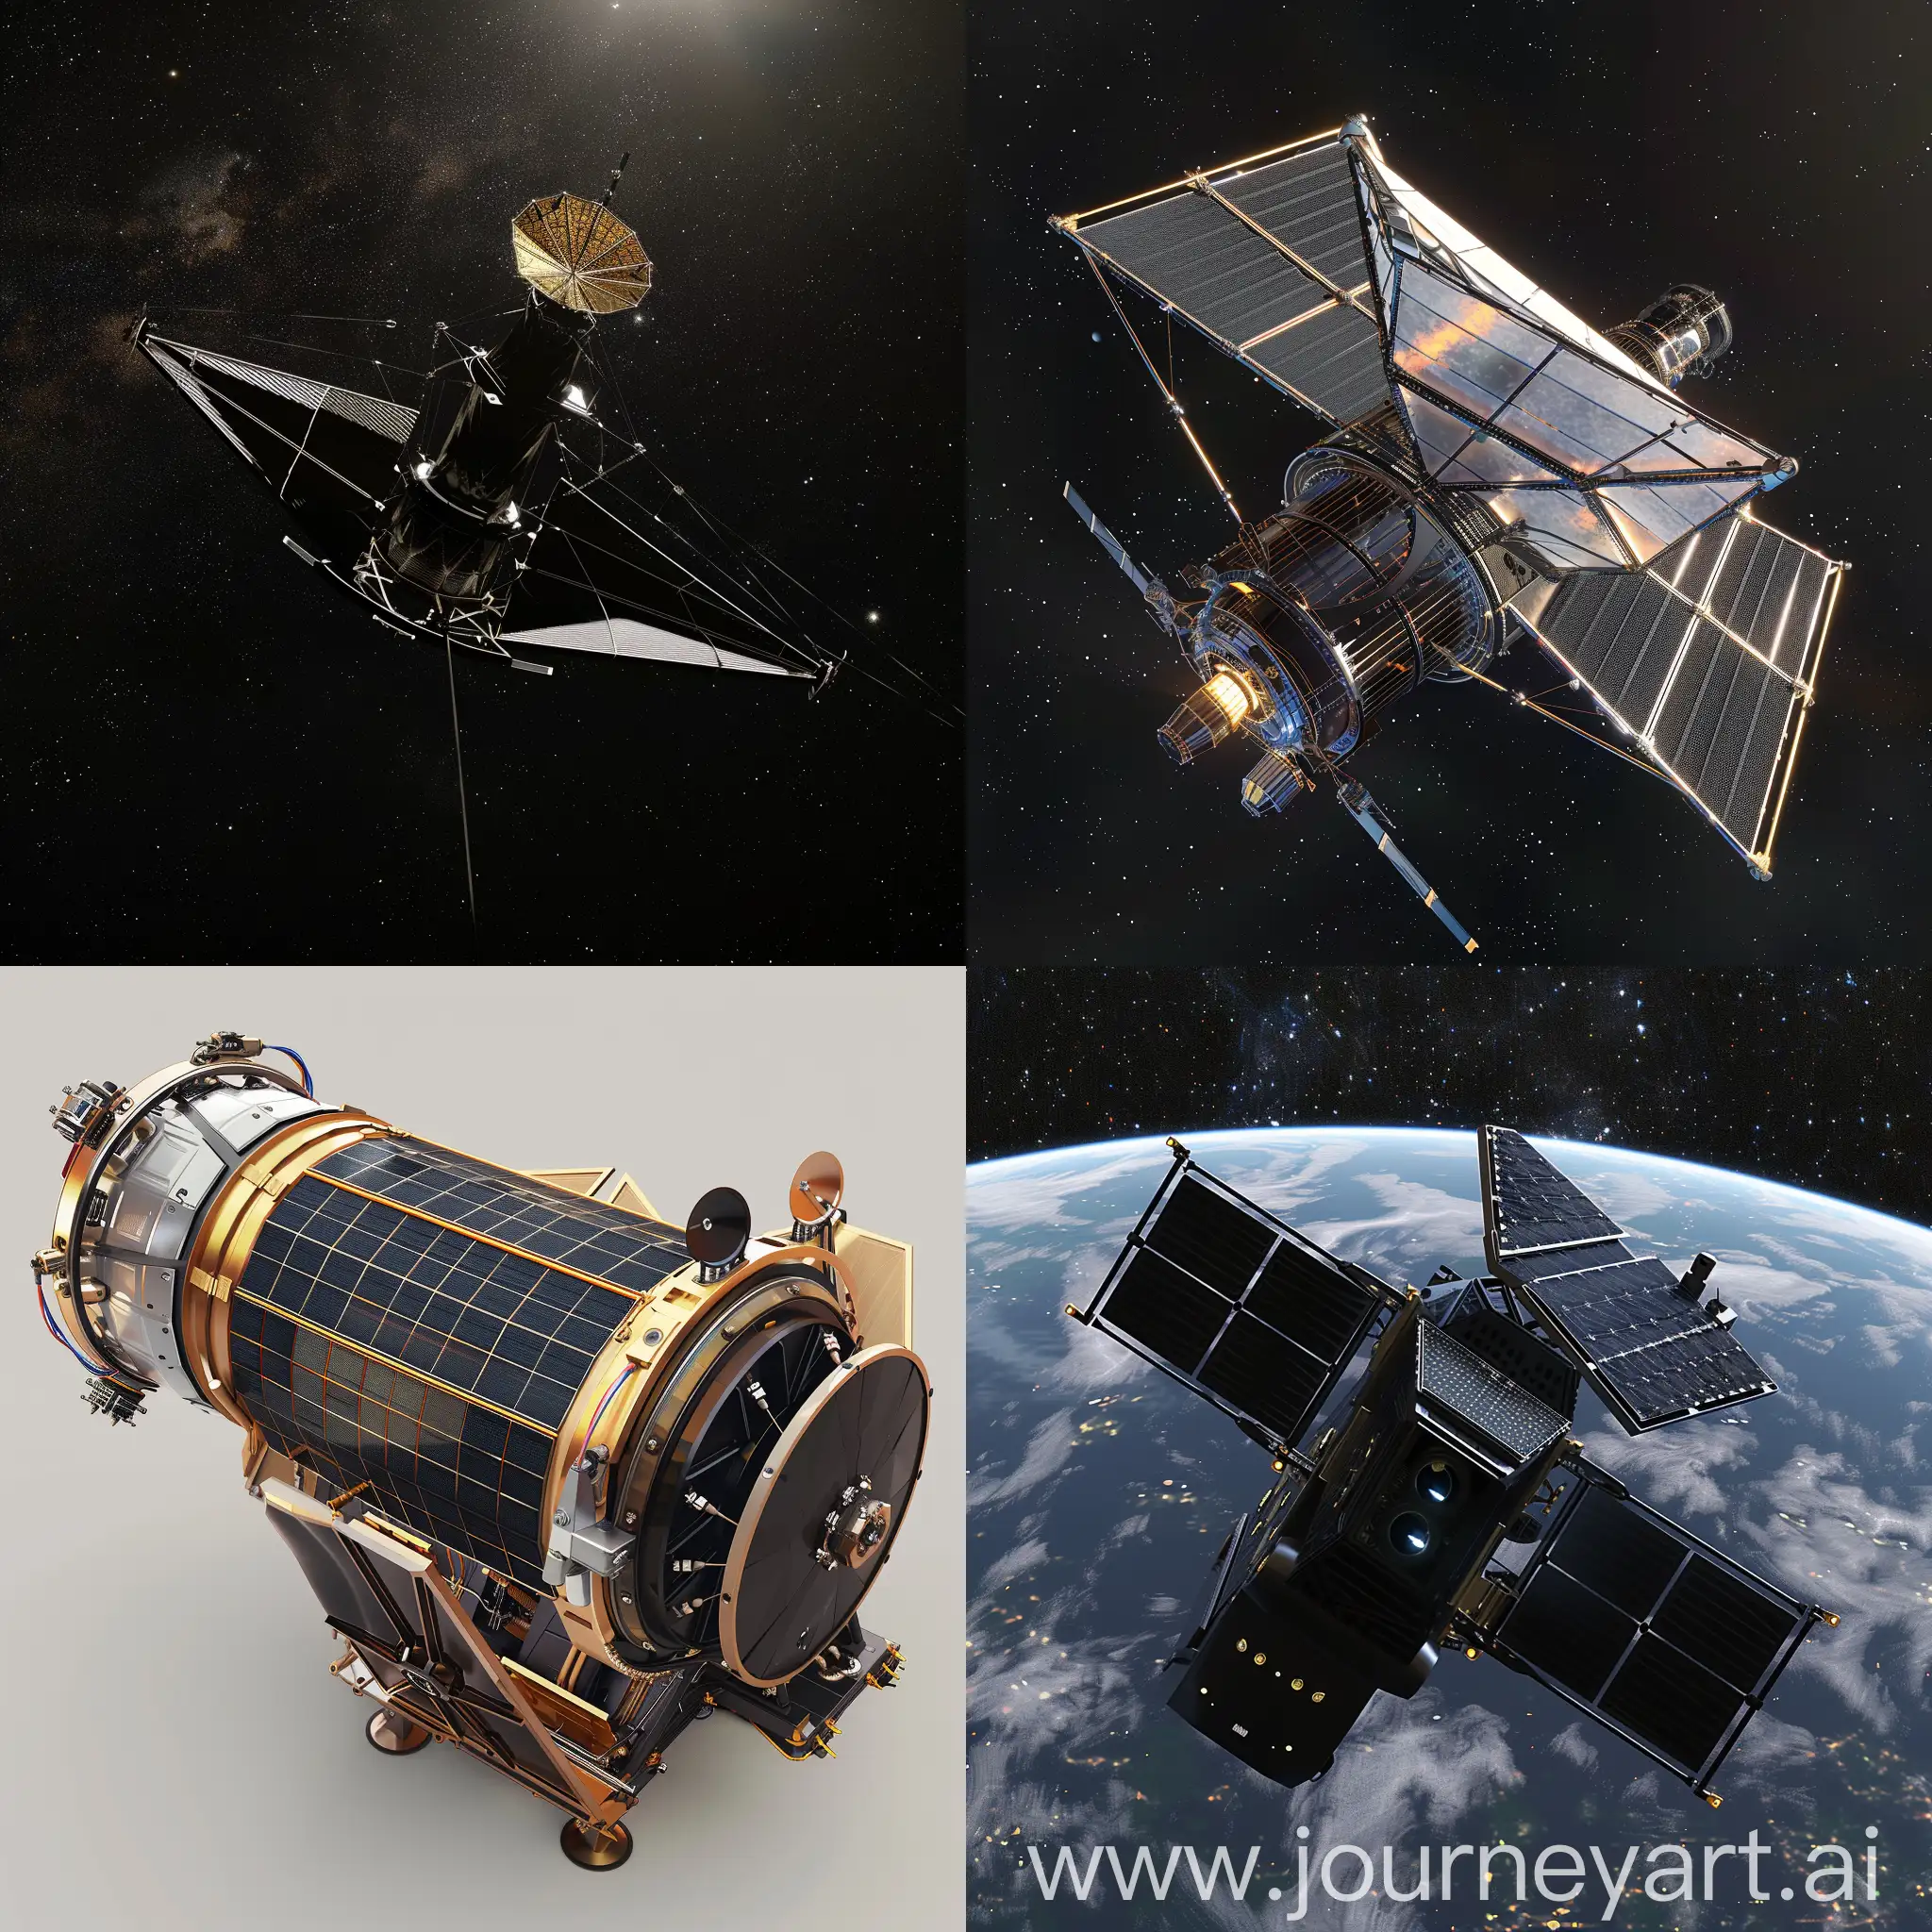 Sci-Fi space telescope, Advanced Science and Technology, Advanced Achievements of Science and Technology, Adaptive Optics, Ultra-Lightweight Materials, Advanced Detectors, AI-Driven Data Analysis, Nanotechnology Coatings, Solar Sail Propulsion, Quantum Communication, Robotic Maintenance, Multi-Spectral Imaging, Exoplanet Atmosphere Analysis, Solar Panel Wings, Thermal Control System, Aerodynamic Shape, Modular Design, Starshade, Communication Arrays, Protective Coating, Docking Ports, Spacecraft Integration, Orbital Adjustment Engines, In Unreal Engine 5 Style --stylize 1000